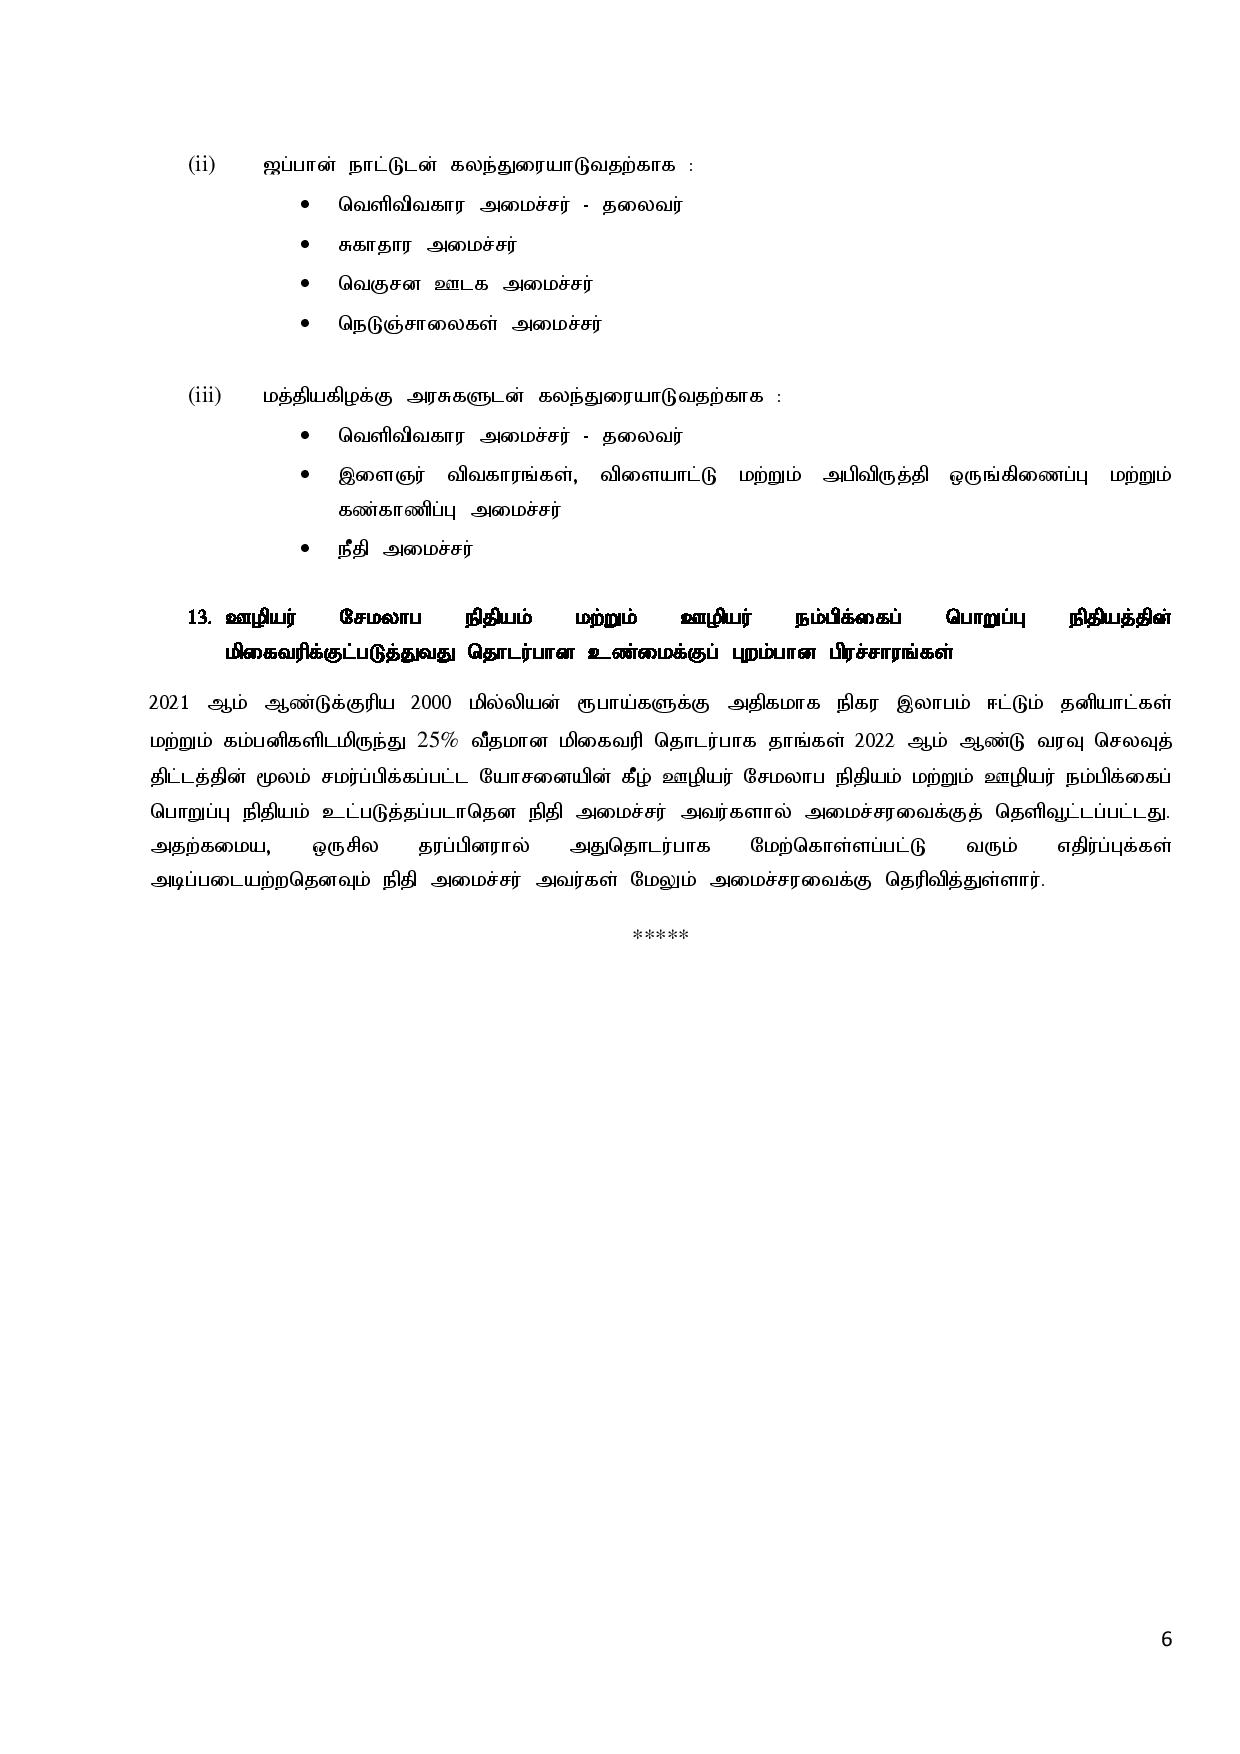 Cabinet Decisions on 14.02.2022 Tamil page 006